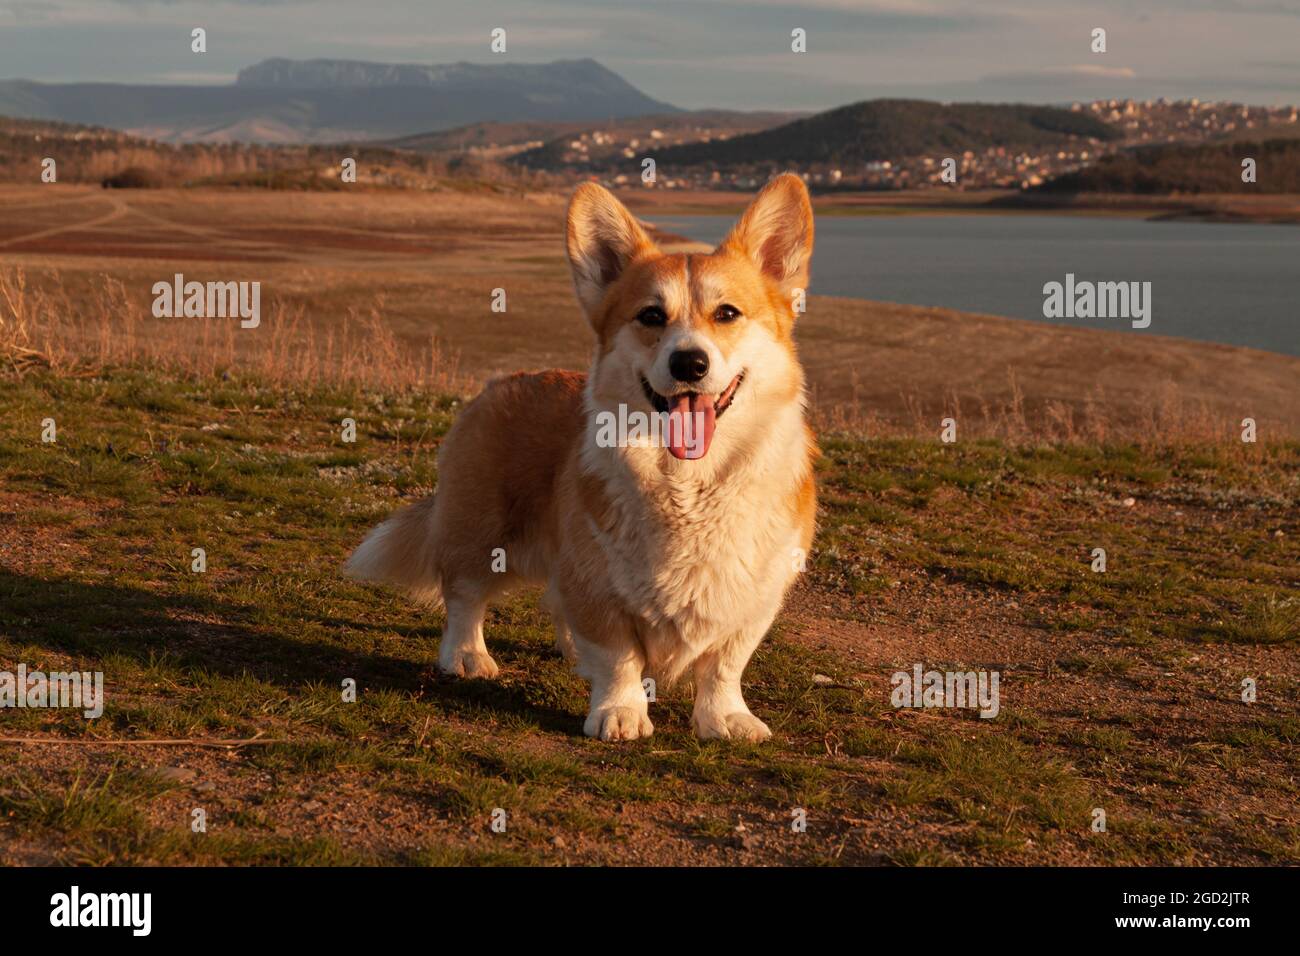 One cute pembroke welsh corgi looks and smiles at the camera against the background of the mountain in the sunset light. Hiking in the mountains Stock Photo